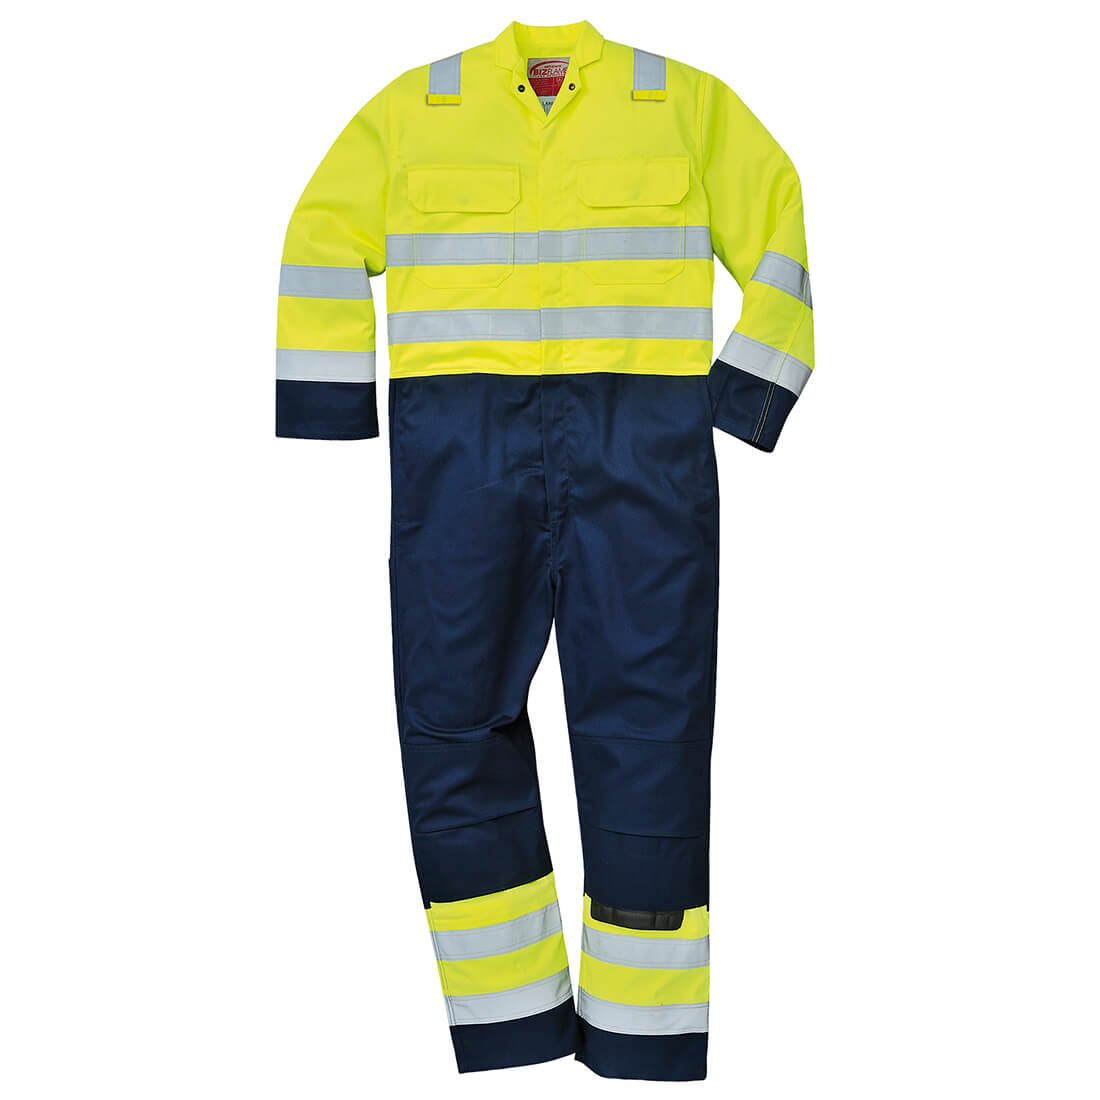 Photo of Biz Flame Pro Flame Resistant Hi Vis Coverall Yellow / Navy 3xl